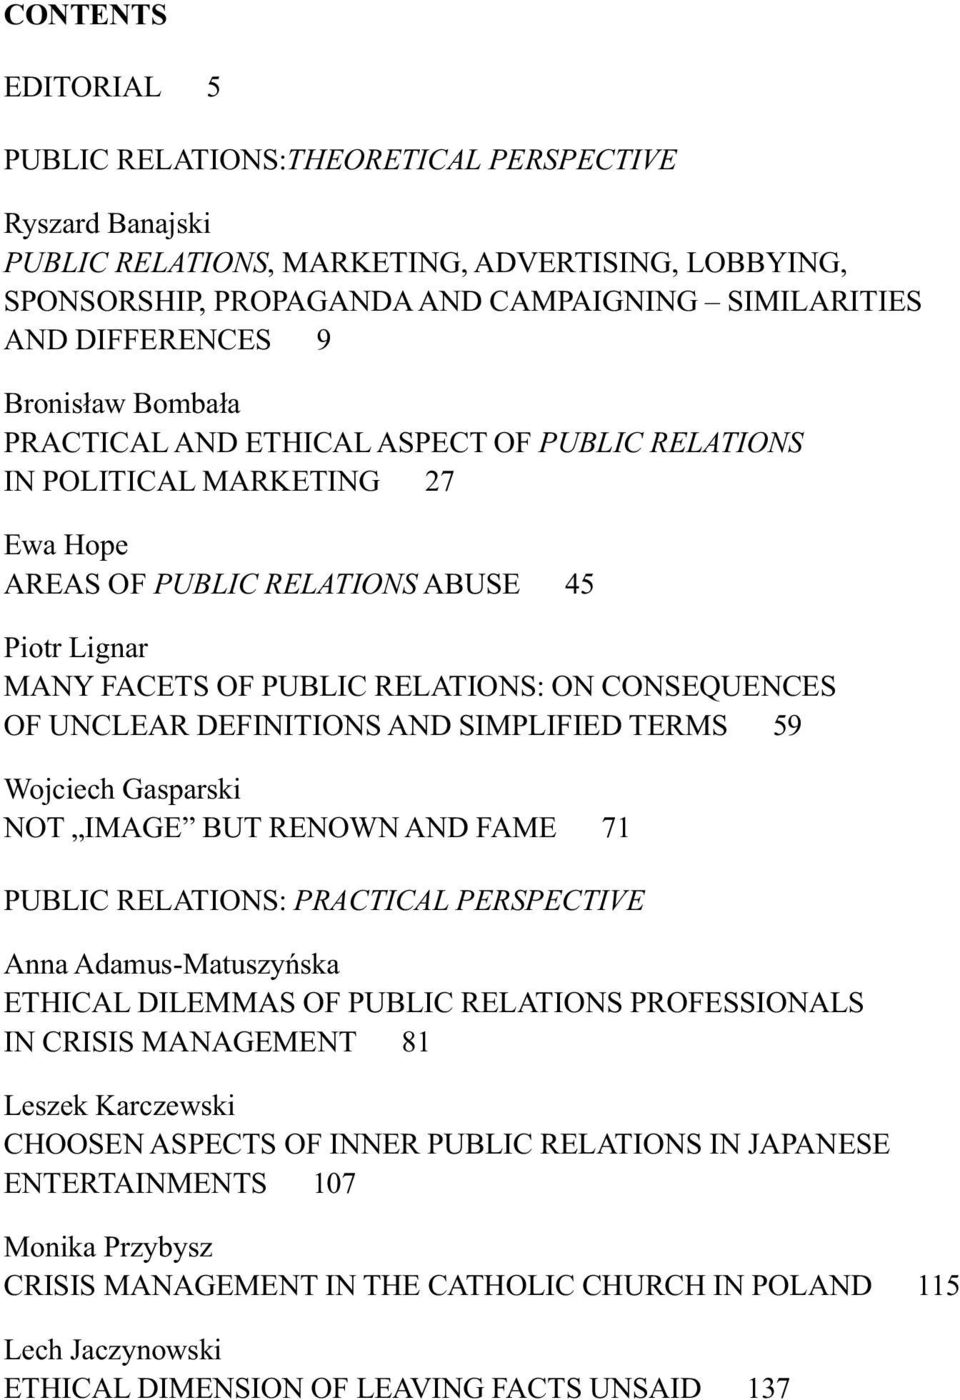 CONSEQUENCES OF UNCLEAR DEFINITIONS AND SIMPLIFIED TERMS 59 Wojciech Gasparski NOT IMAGE BUT RENOWN AND FAME 71 PUBLIC RELATIONS: PRACTICAL PERSPECTIVE Anna Adamus-Matuszyńska ETHICAL DILEMMAS OF